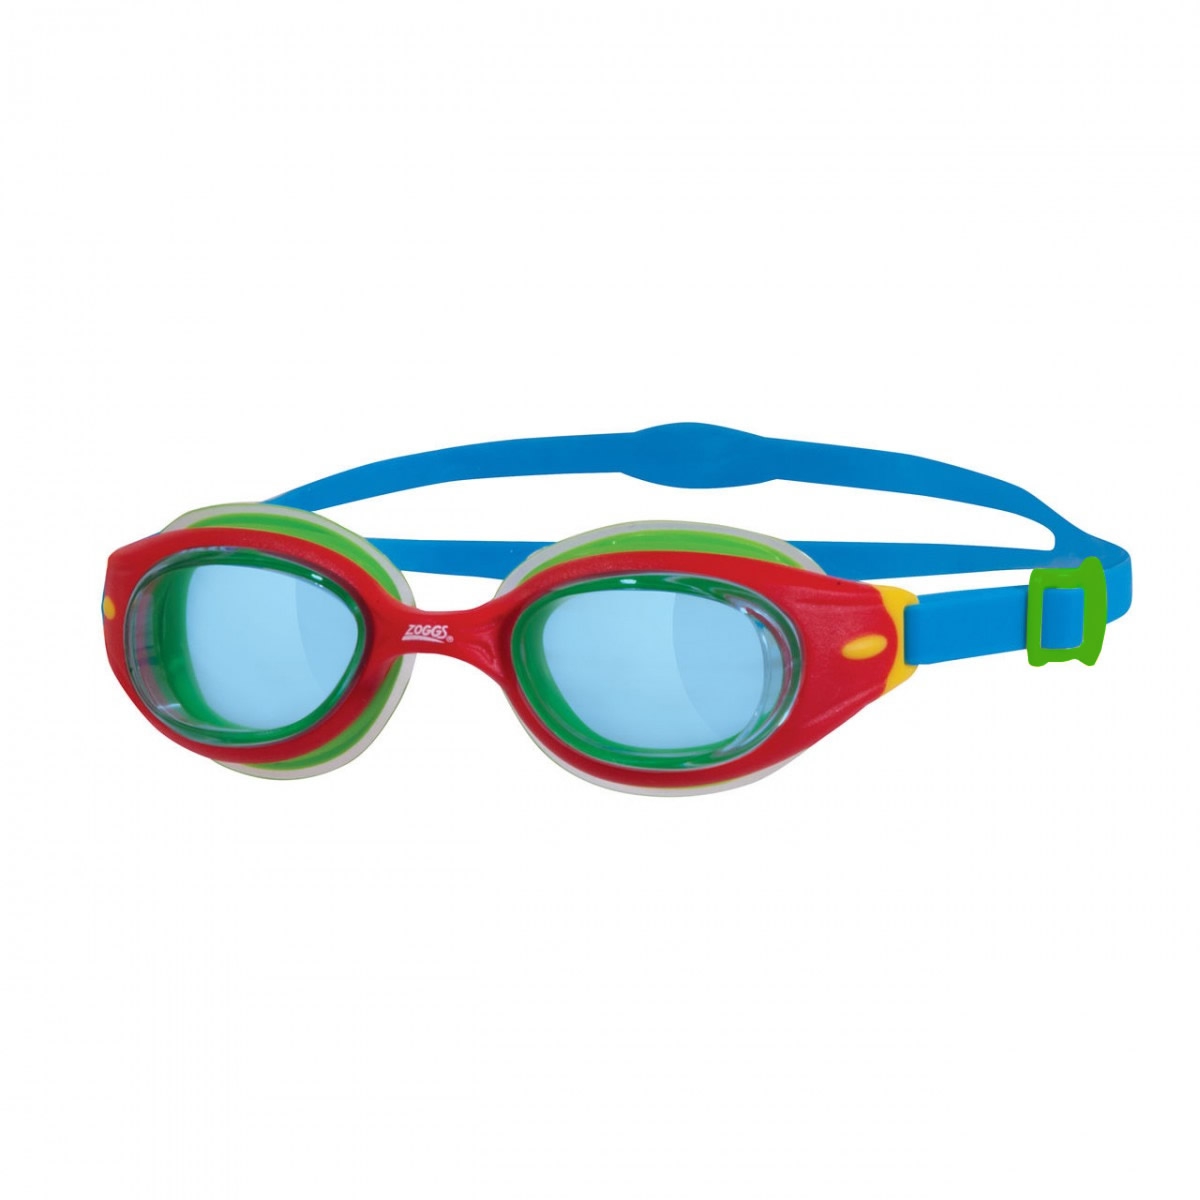 Little Sonic Air 'Red' Swimming Goggles 0-6 Years Pool